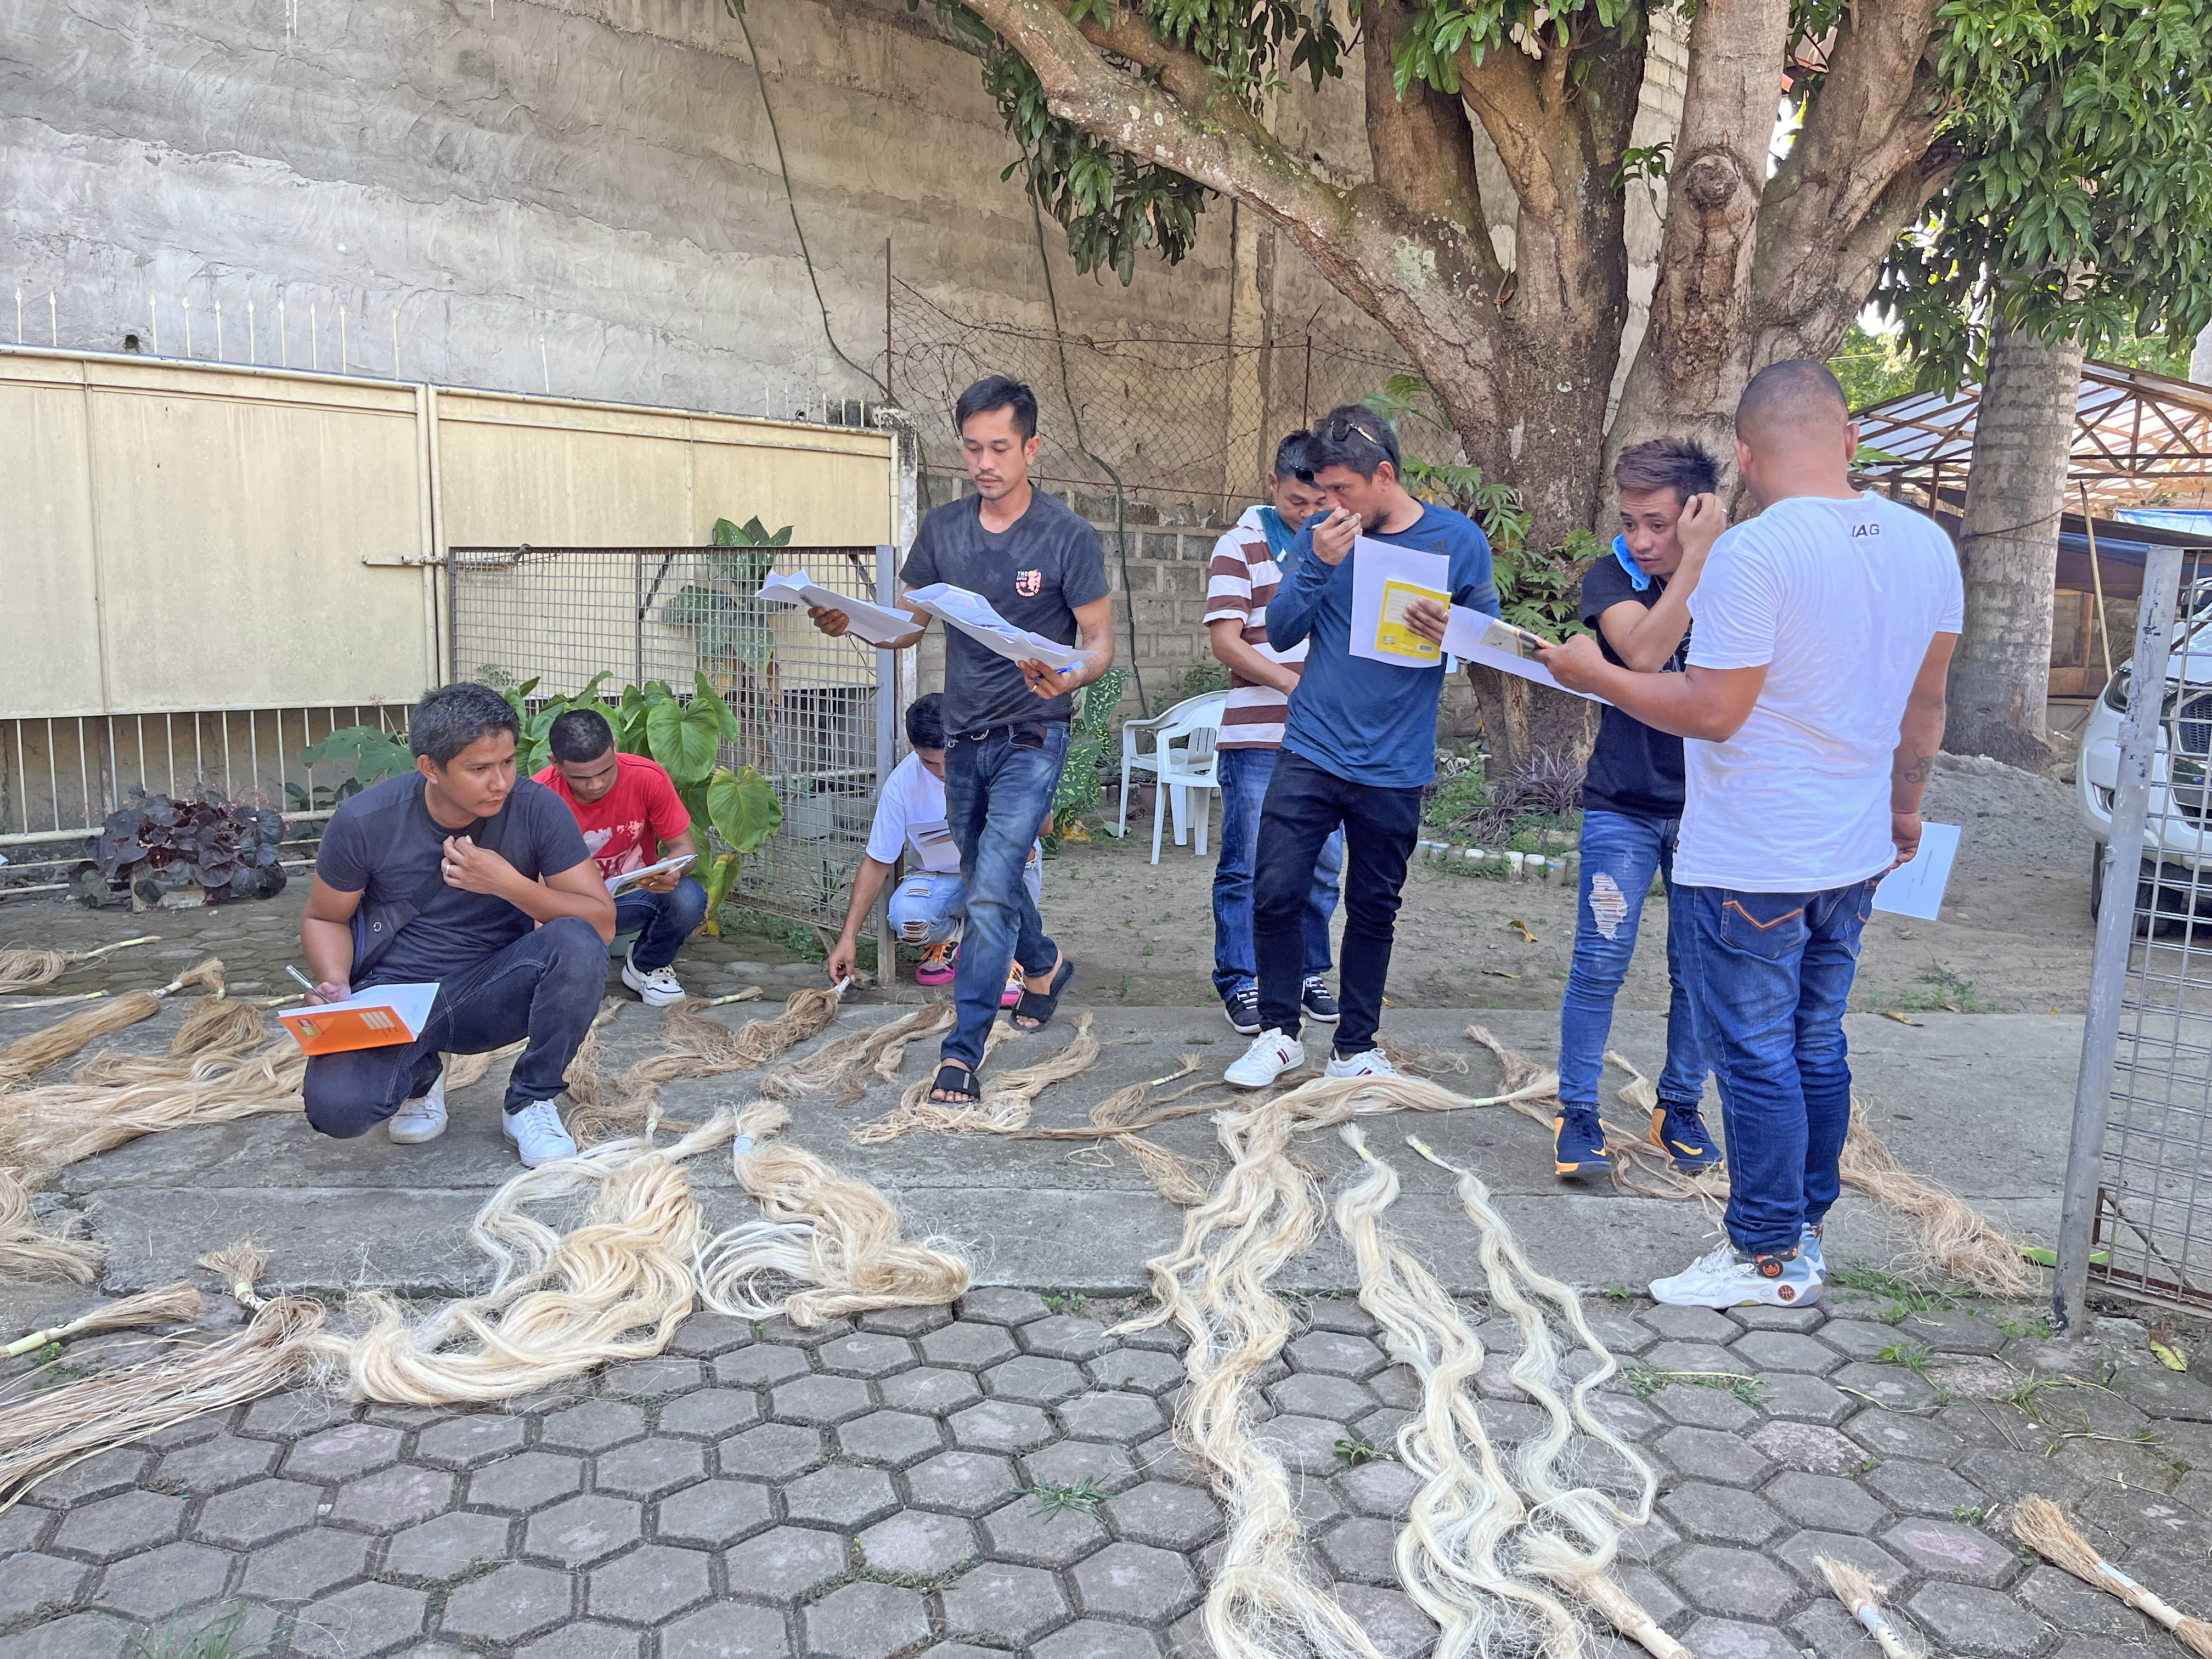 philfida-regional-office-x-conducts-re-orientation-and-re-examination-for-fiber-classifiers/philfida-regional-office-x-conducts-re-orientation-and-re-examination-for-fiber-classifiers 2